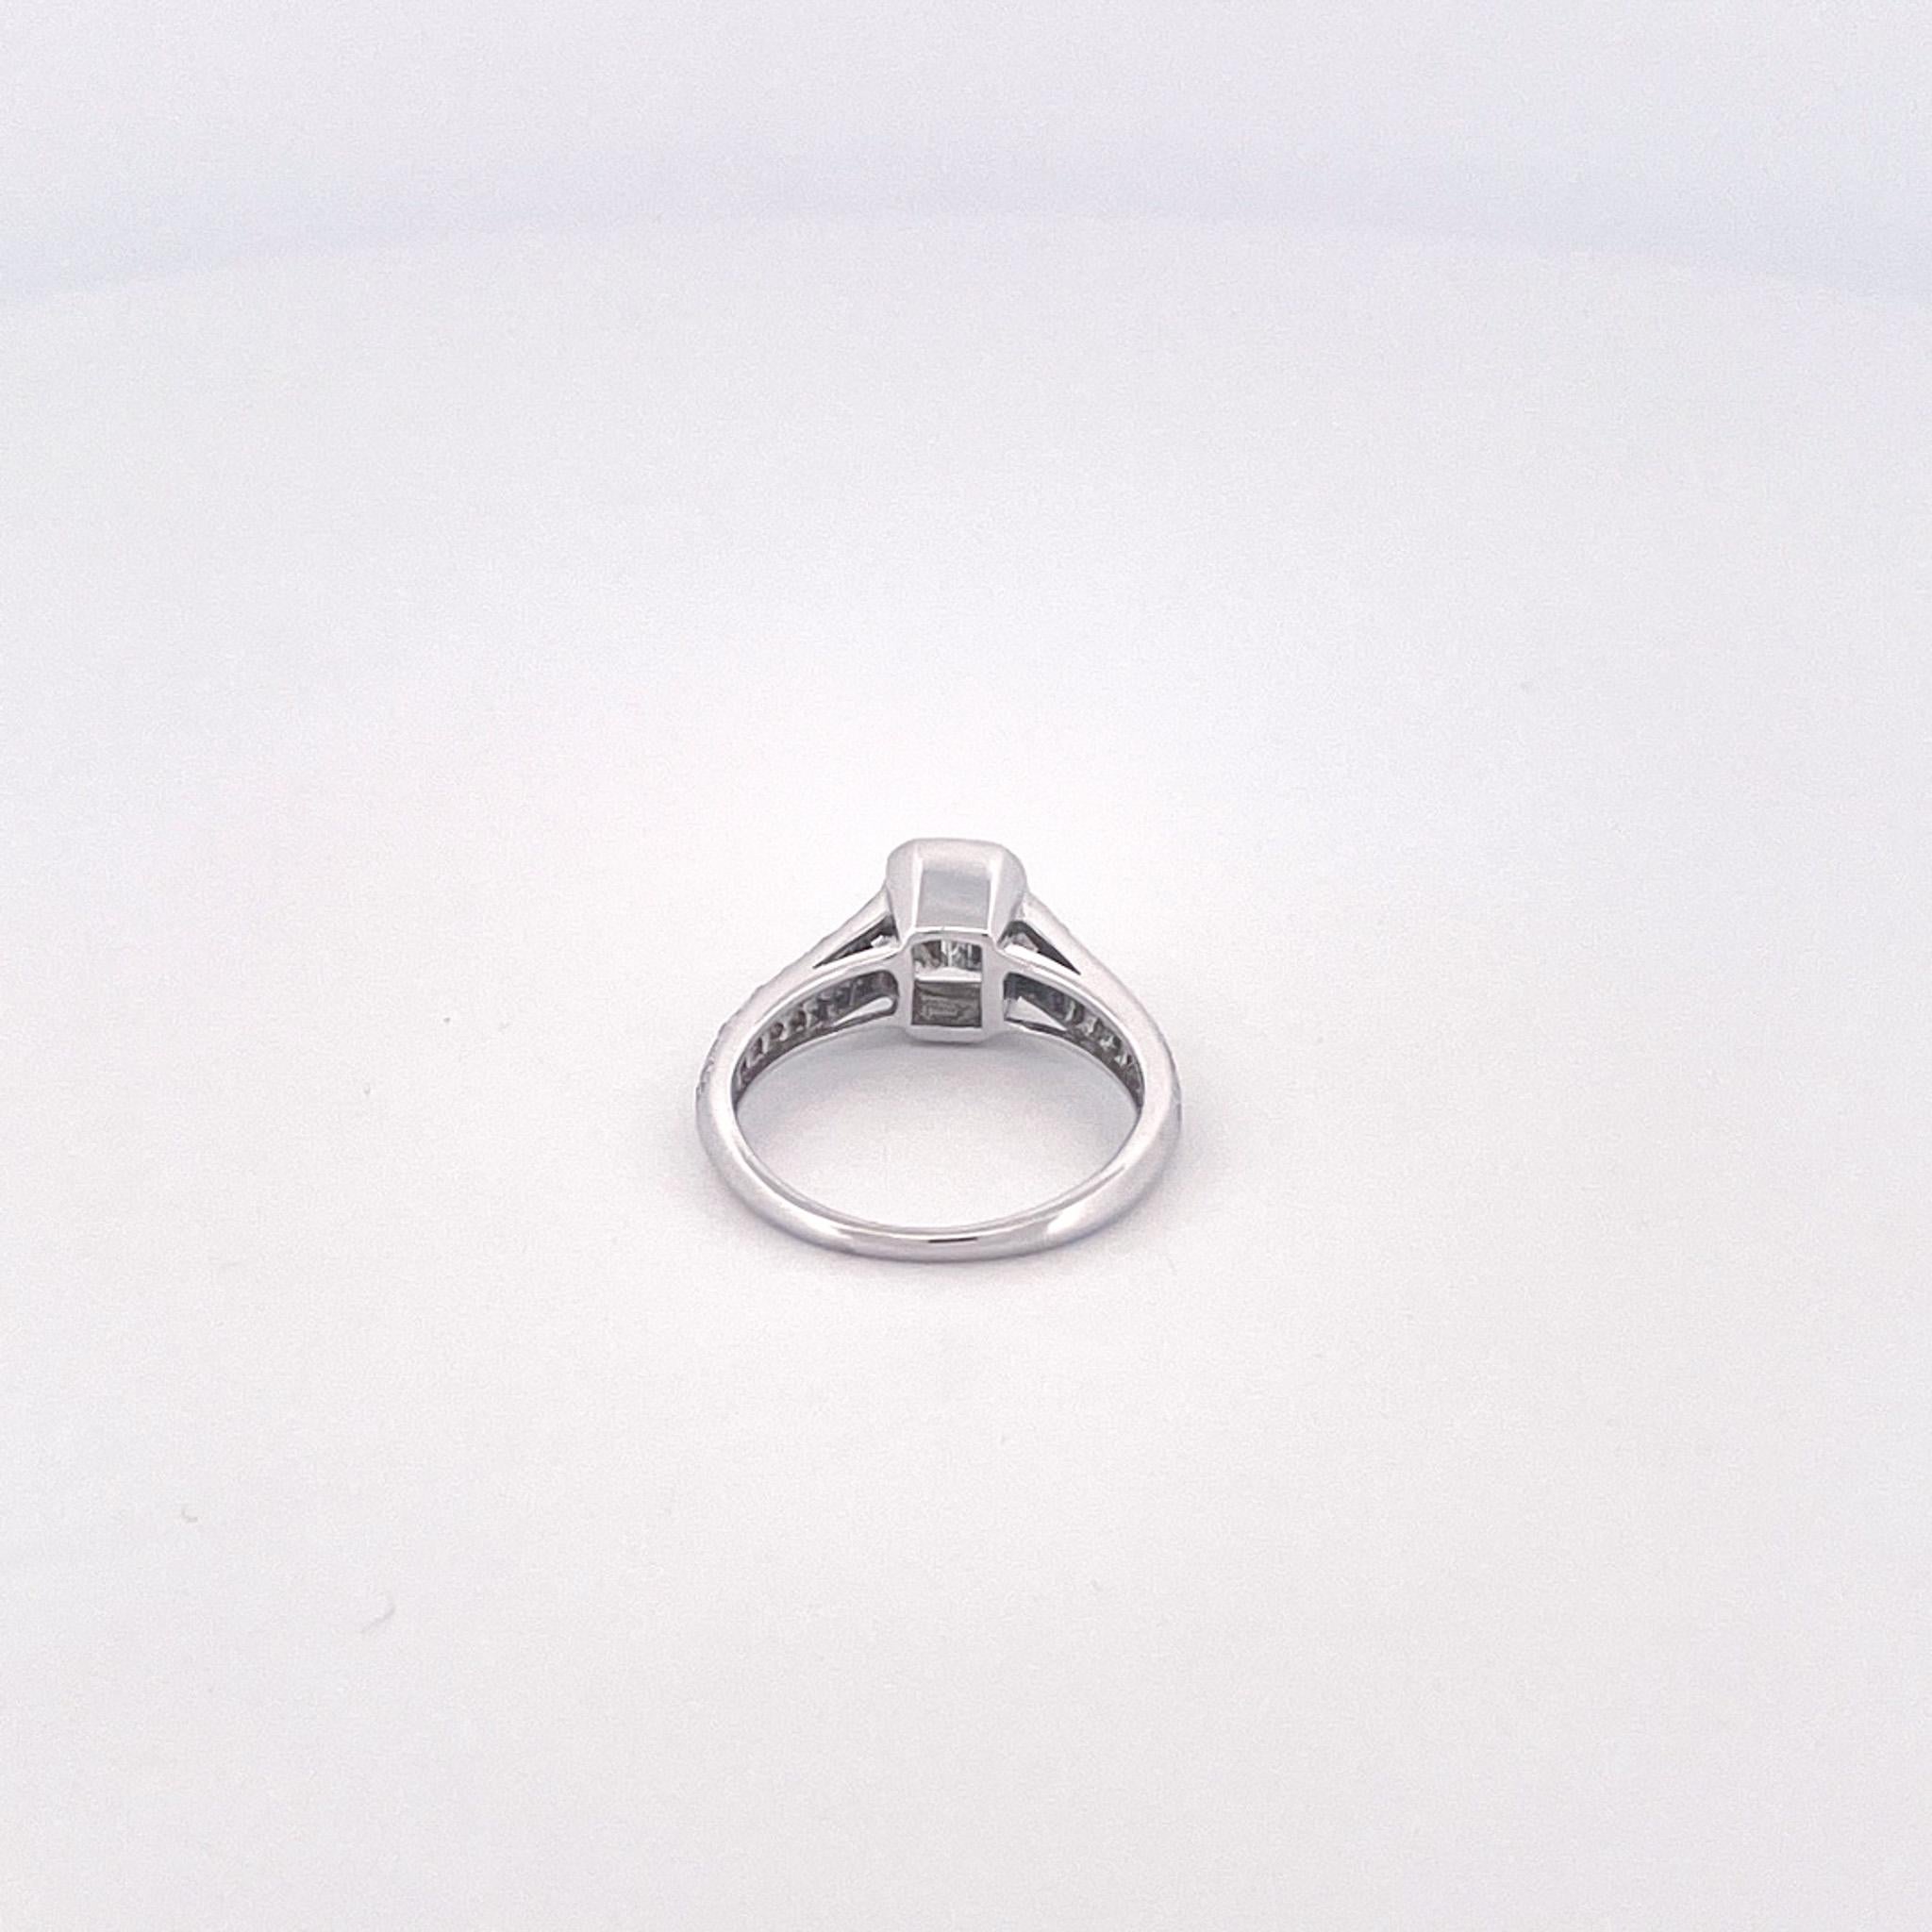 Women's White Gold 1 CT Diamond Engagement Ring For Sale